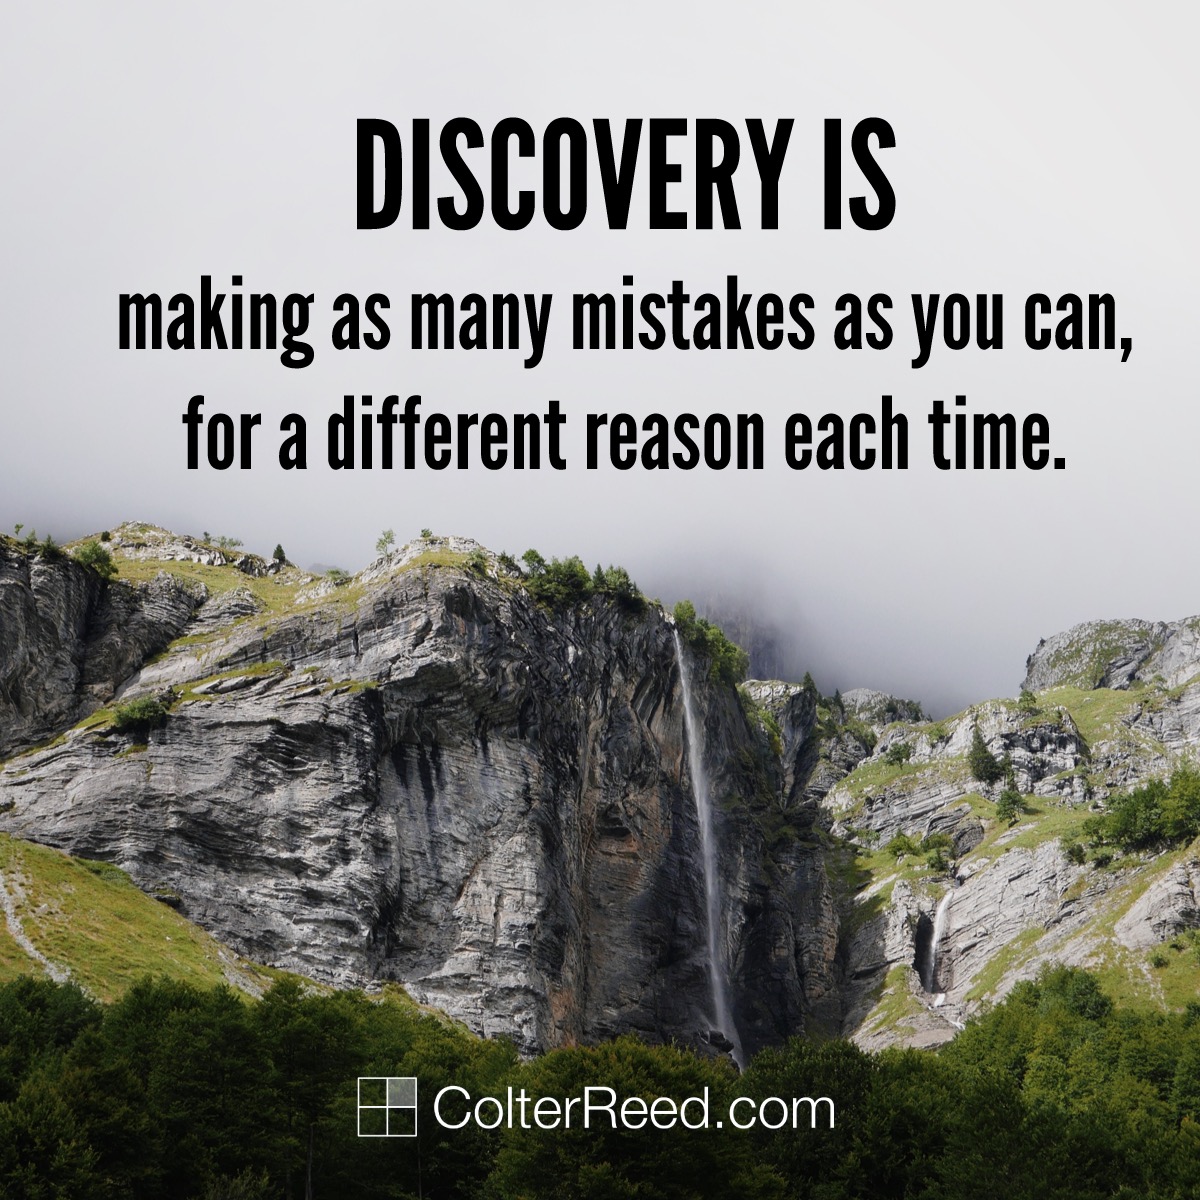 Discovery is making as many mistakes as you can, for a different reason each time.